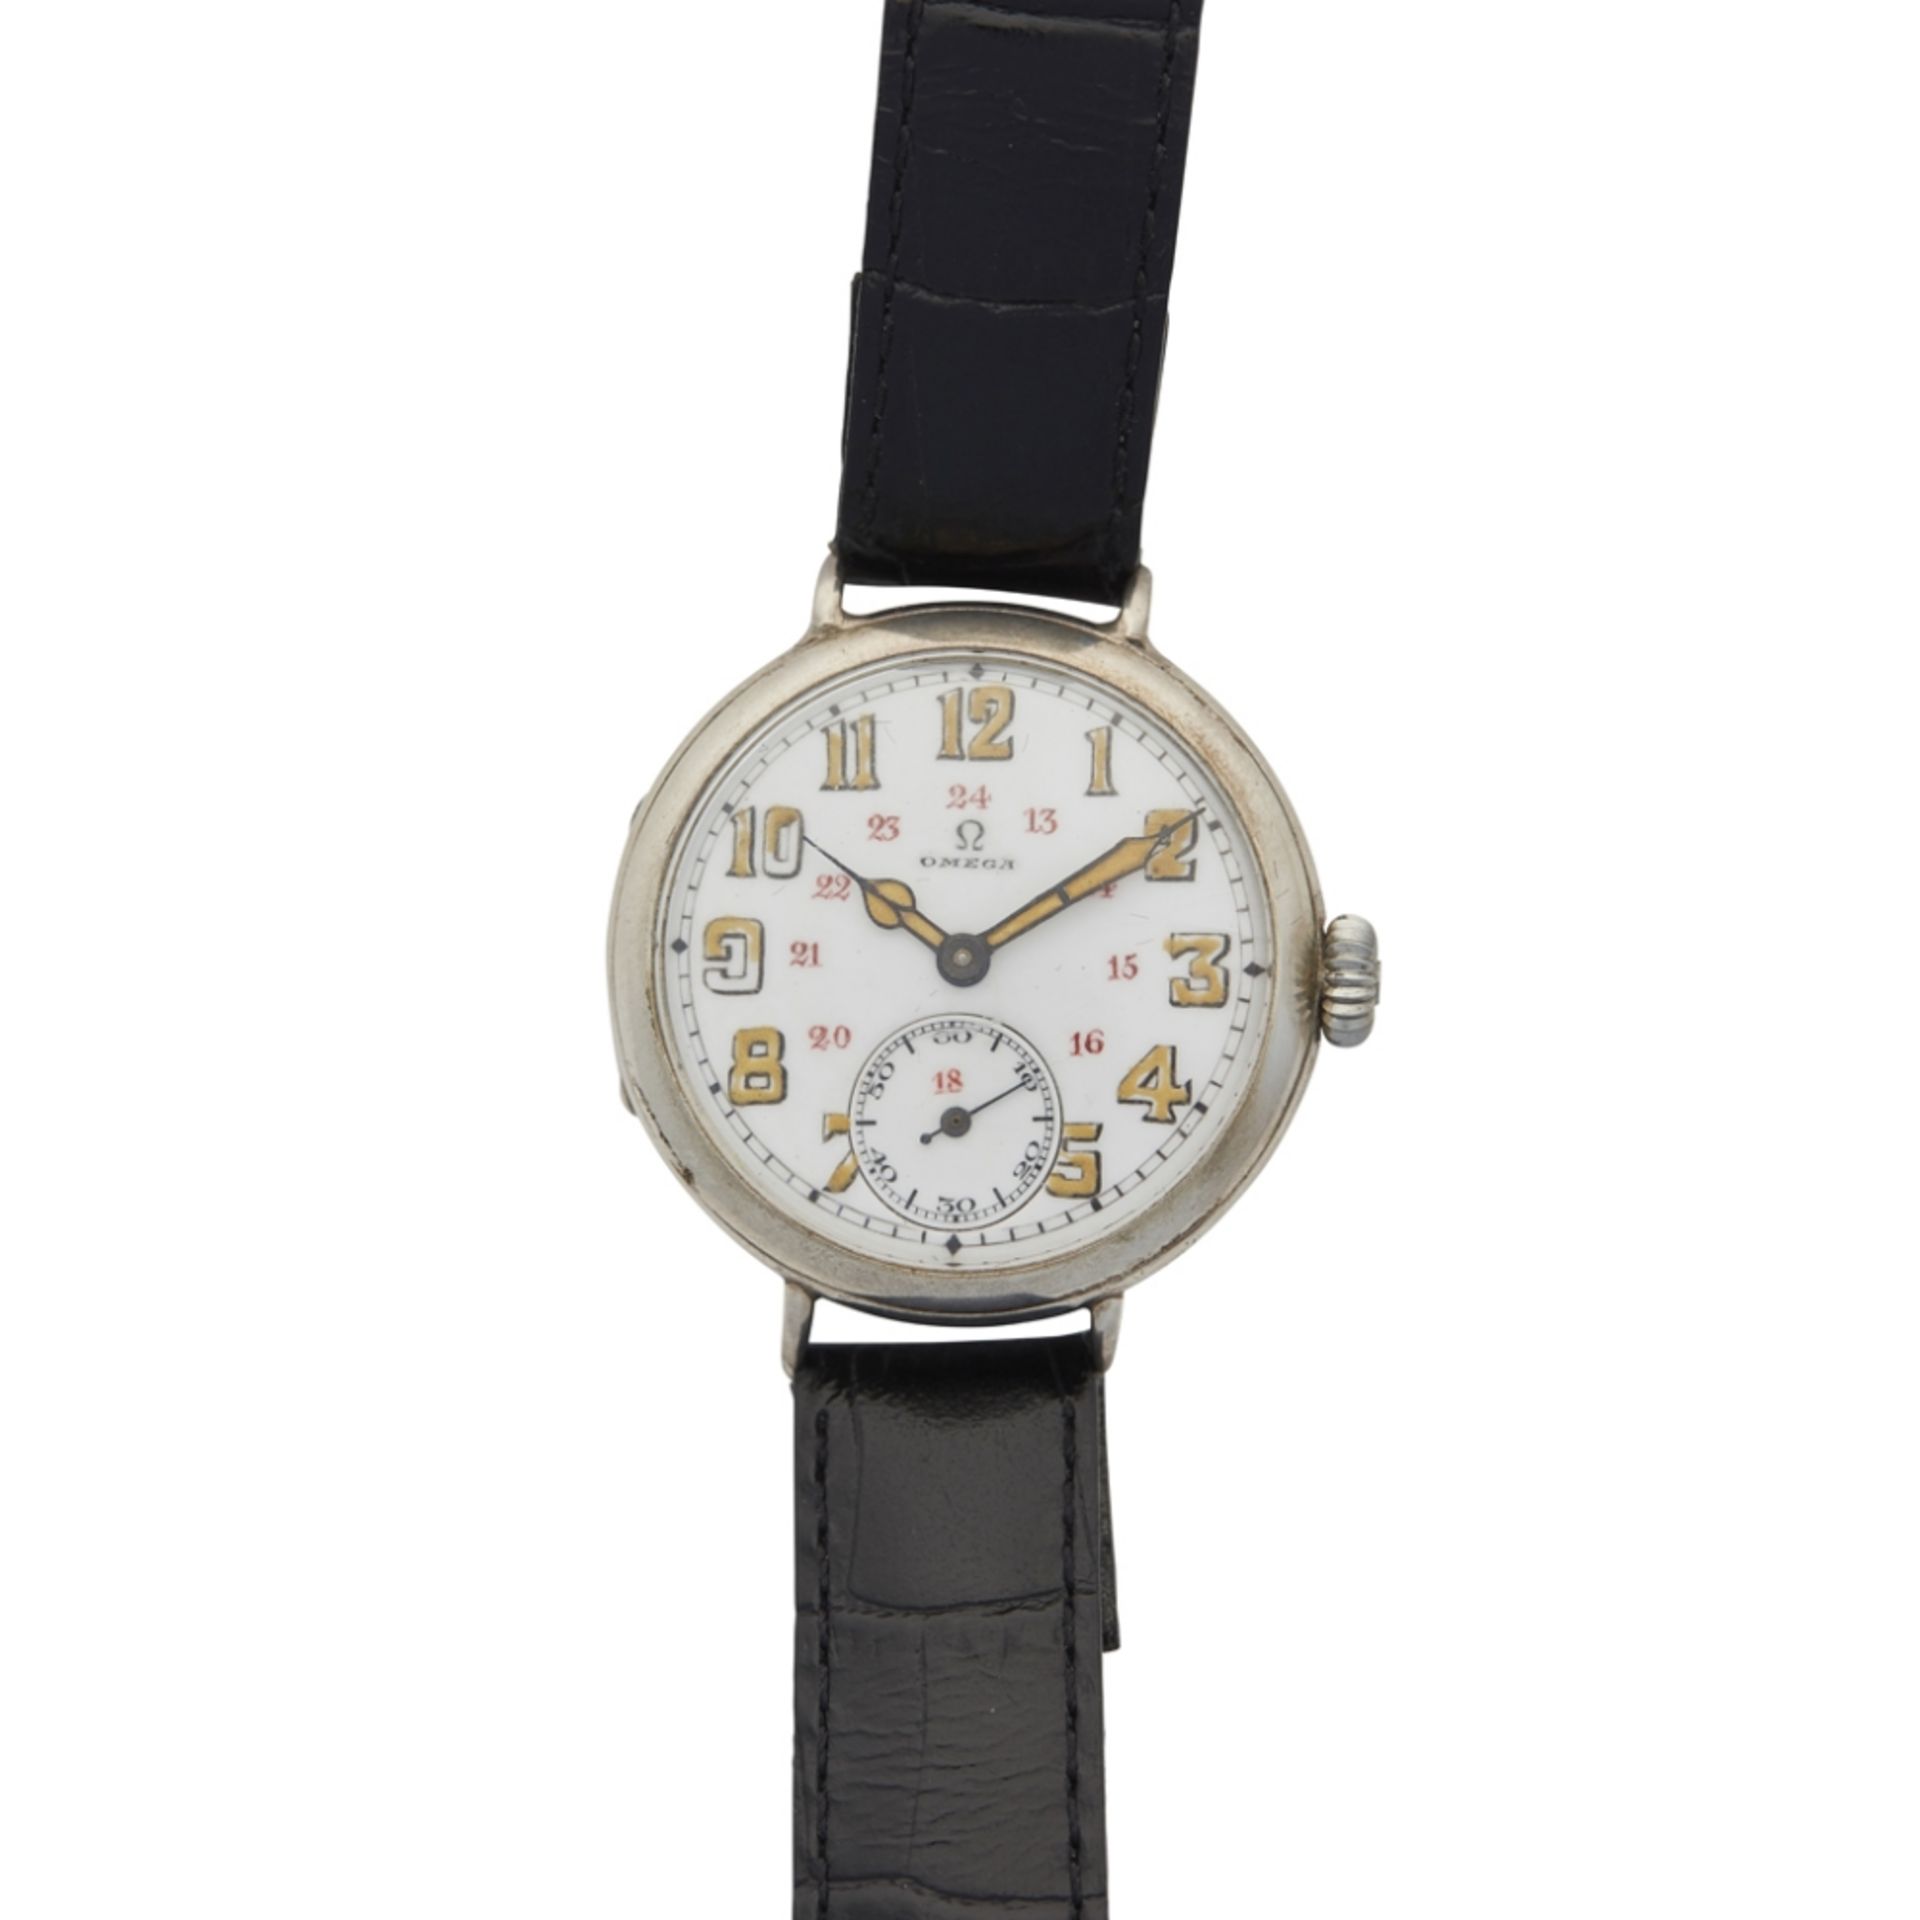 A gentleman's silver cased wrist watch, Omegacirca 1910, the white enamel dial with luminous